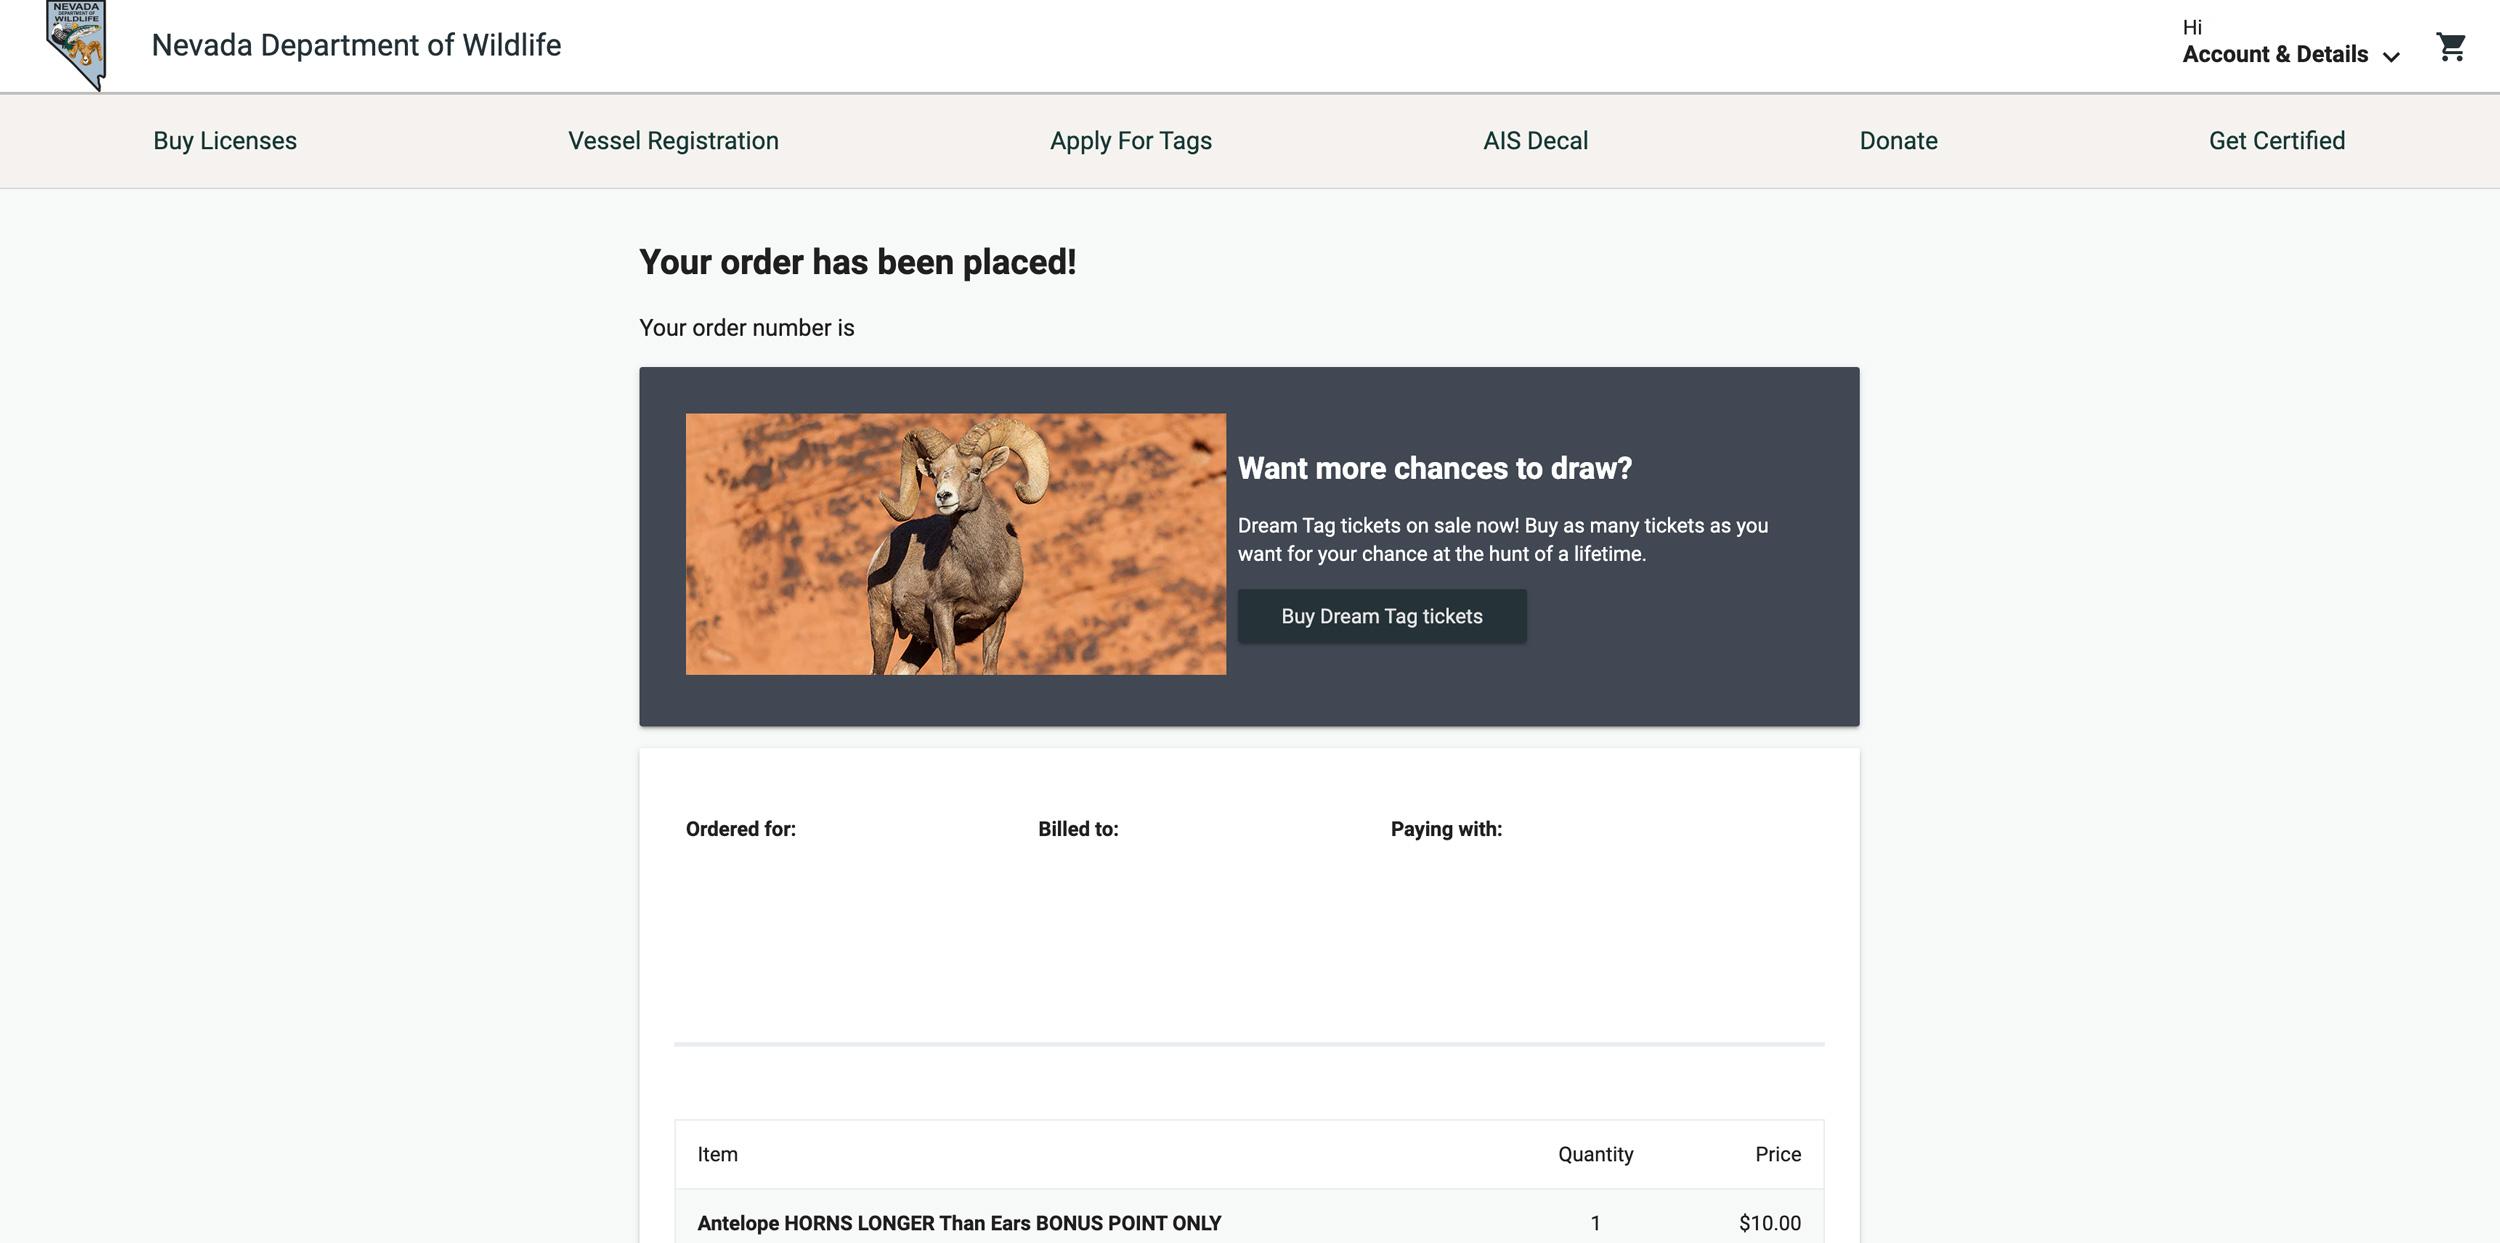 Nevada bonus point order confirmation page after checkout